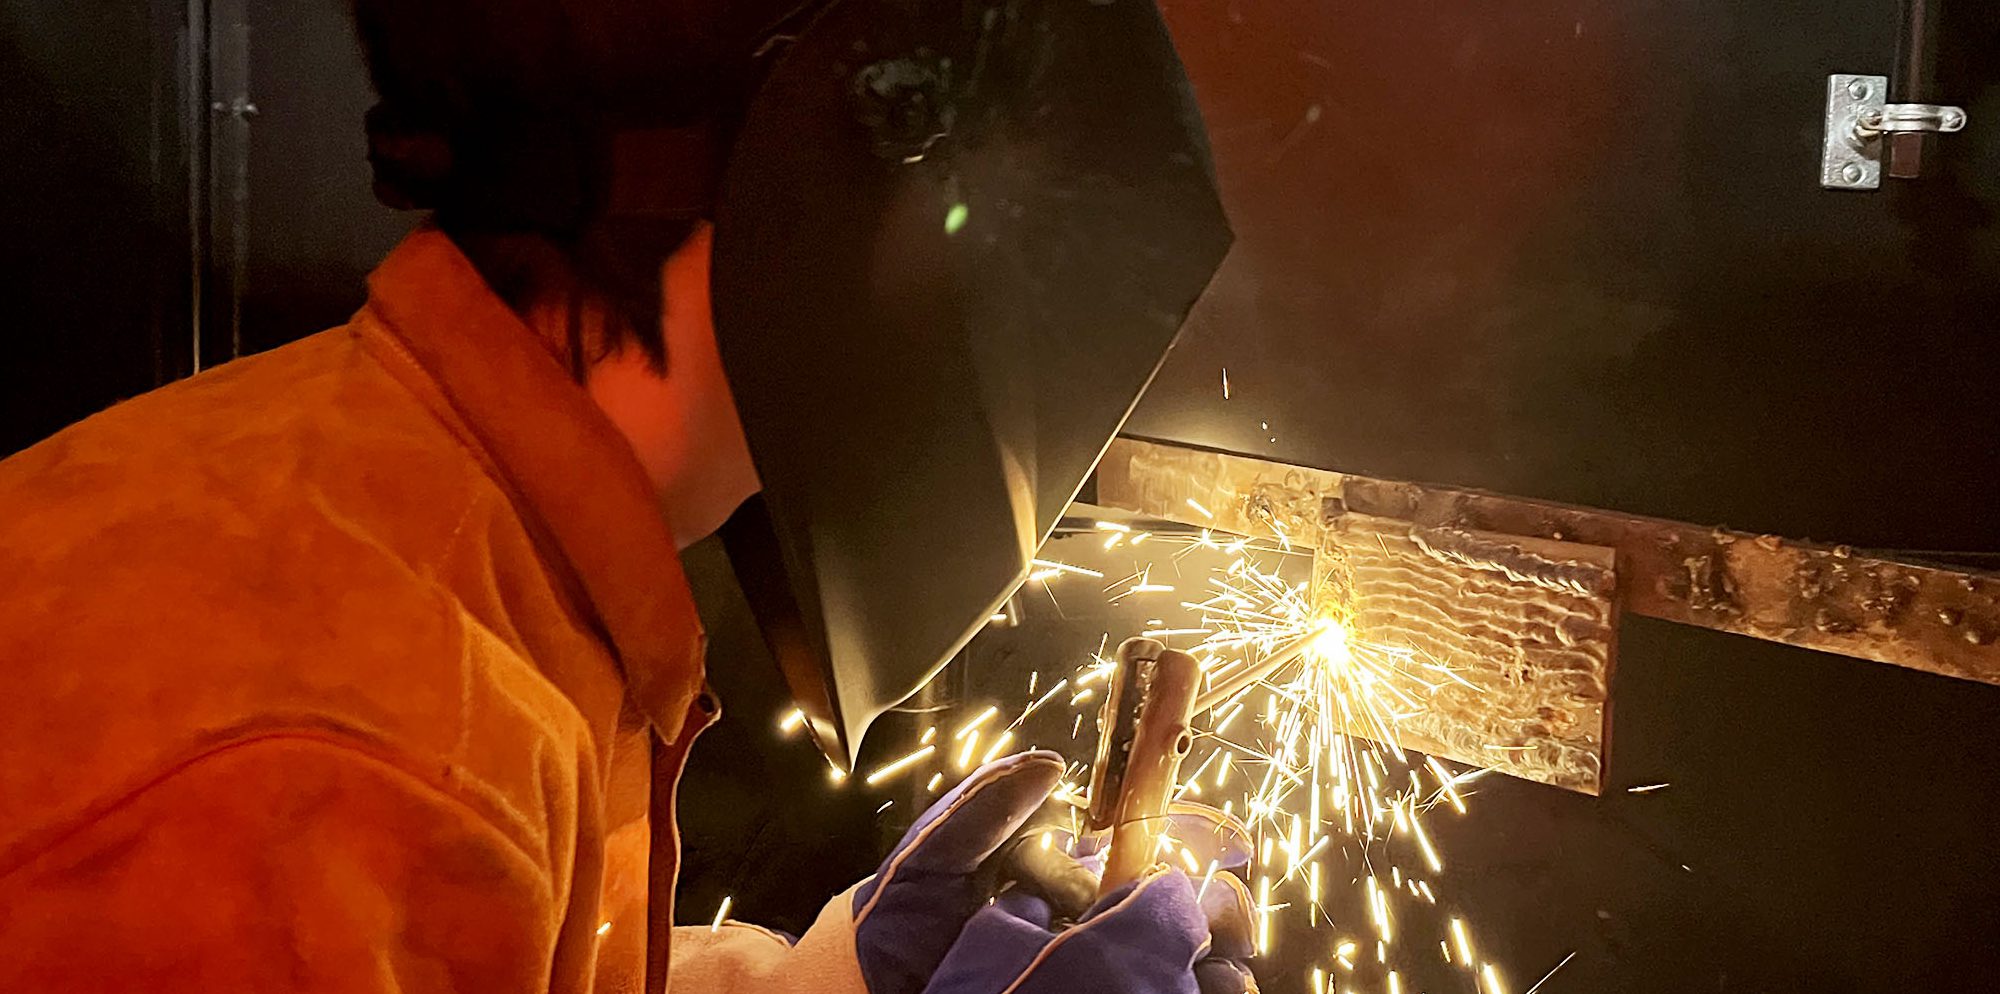 A student in a welding helmet works with sparks flying from her tools.